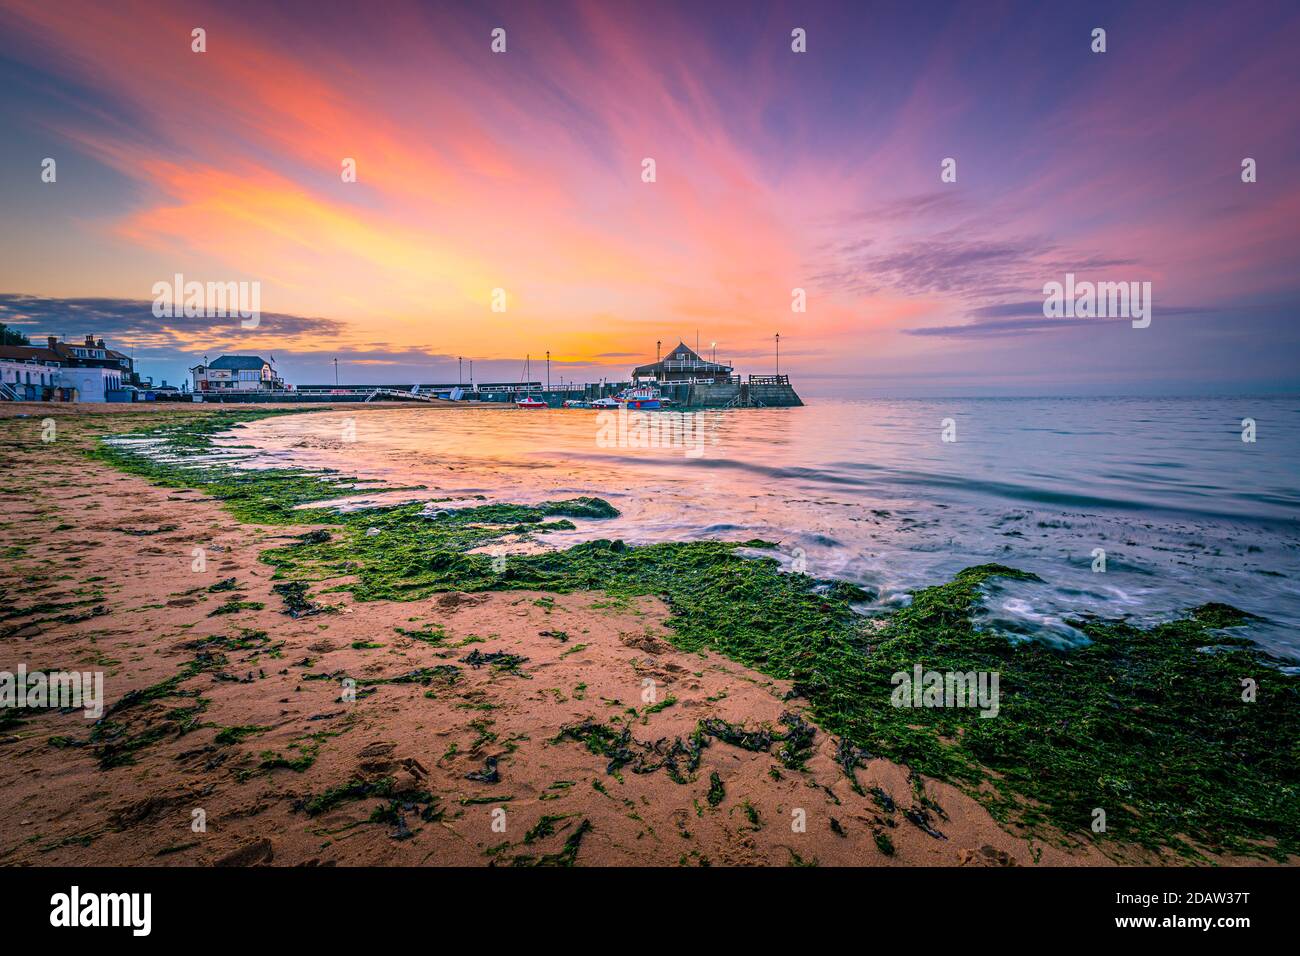 Broadstairs Pier In Thanet, Kent In The United Kingdom At Dawn With The Sun Rising Behind Stock Photo